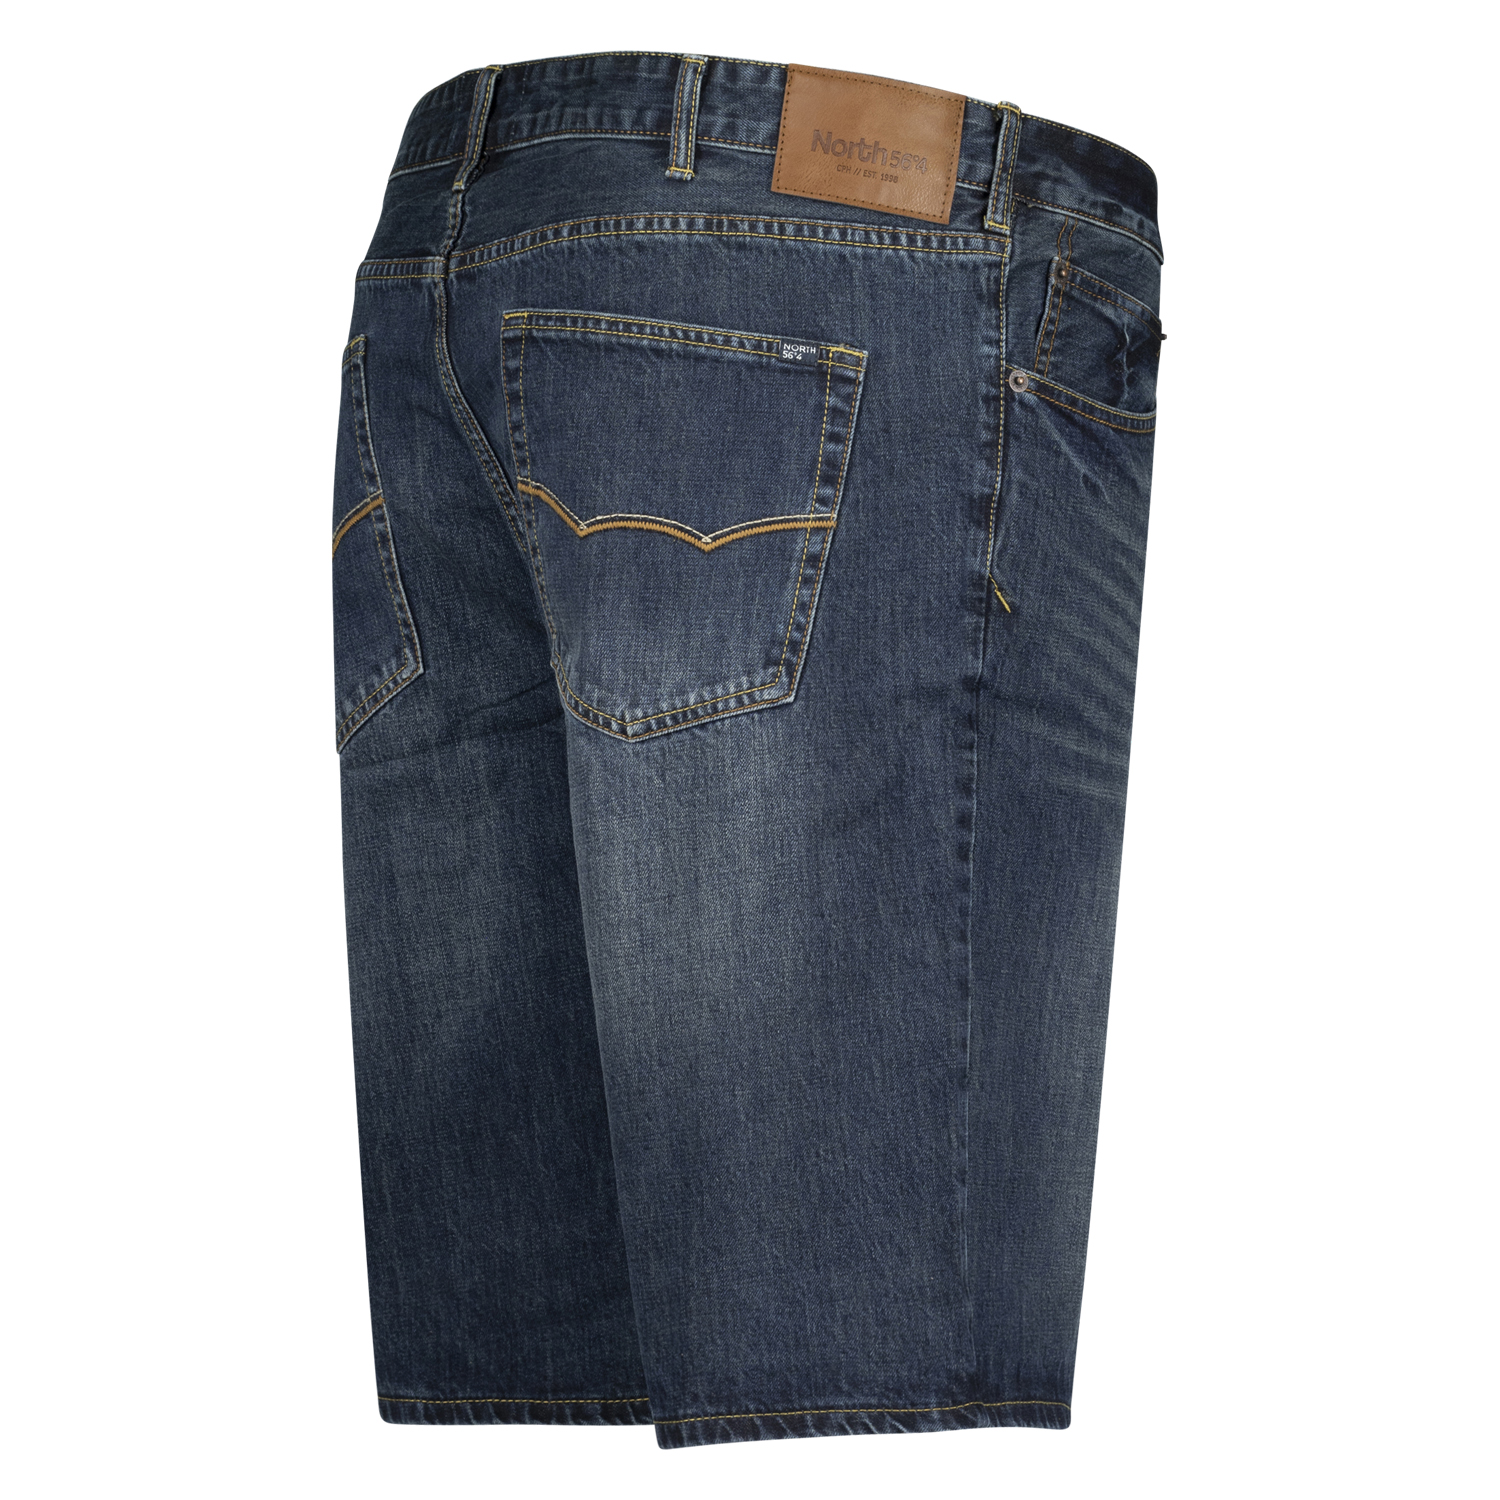 Blue denim long shorts for men by North 56°4 in oversizes up to W70